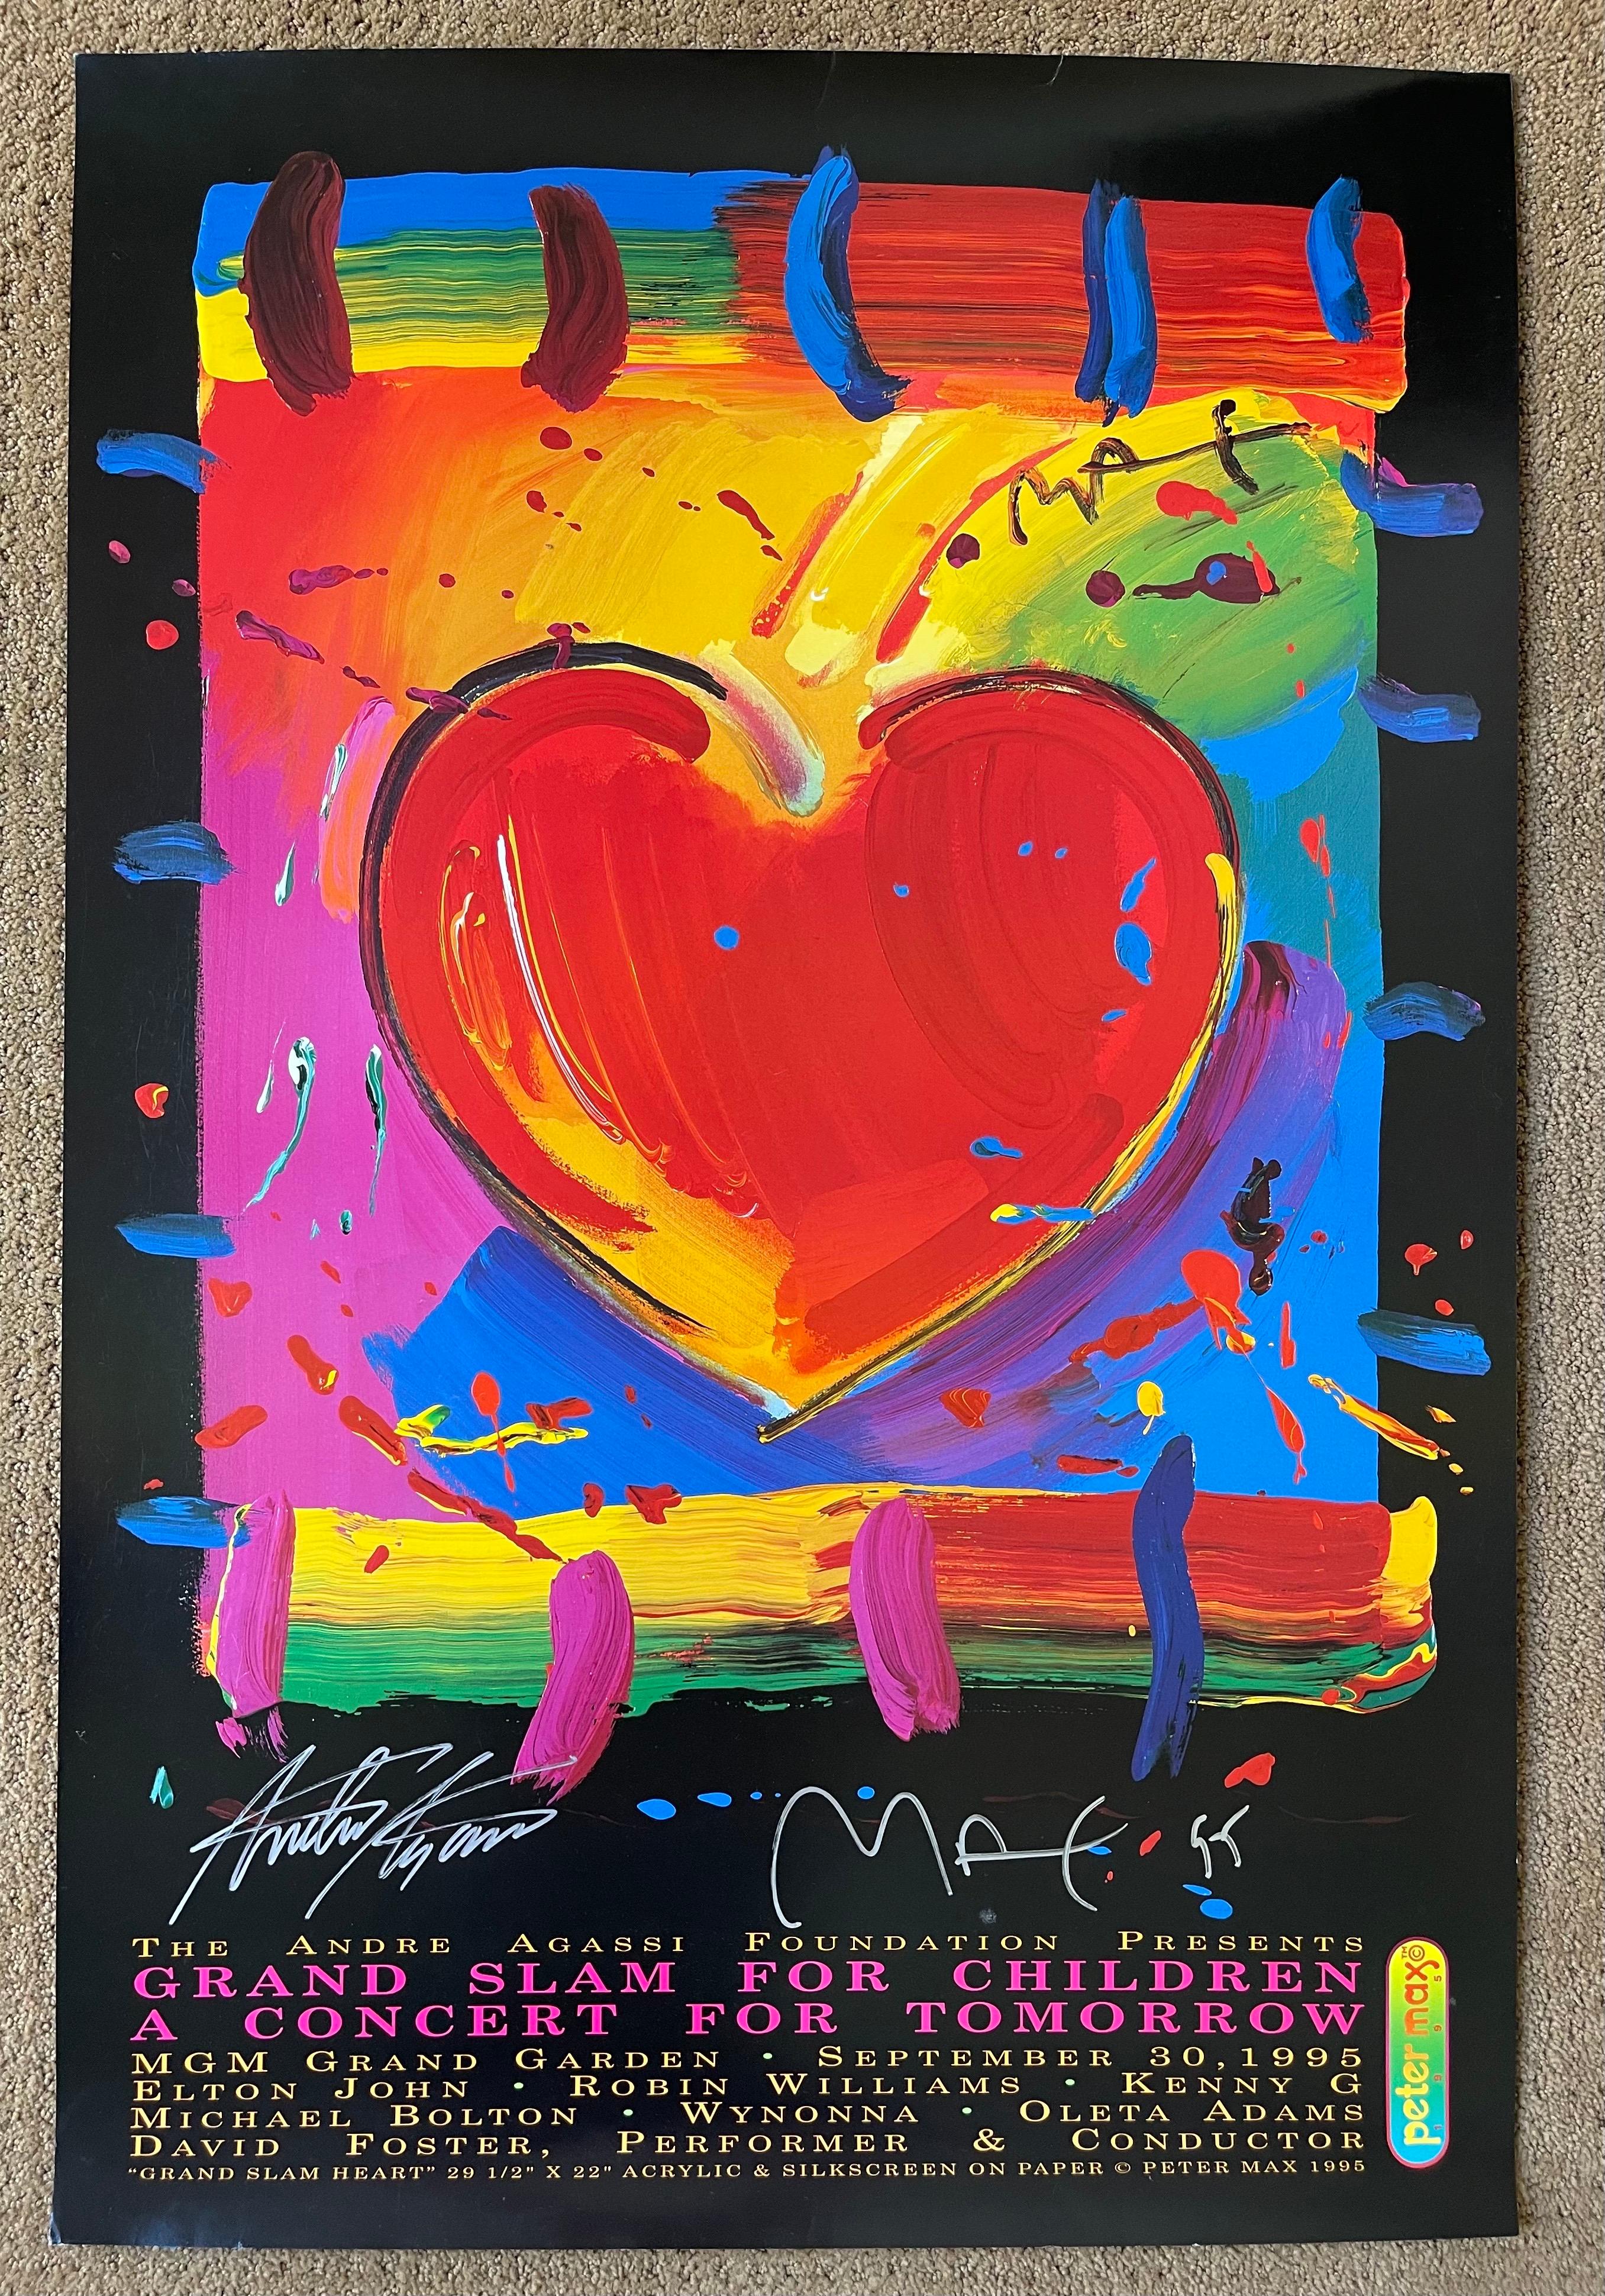 Vintage “Grand Slam for Children A Concert for Tomorrow” / Heart lithograph poster signed by Peter Max and tennis great, Andre Agassi, circa 1995. The concert was held at the MGM Grand Garden in Las Vegas, NV on September 30, 1995 and featured Elton